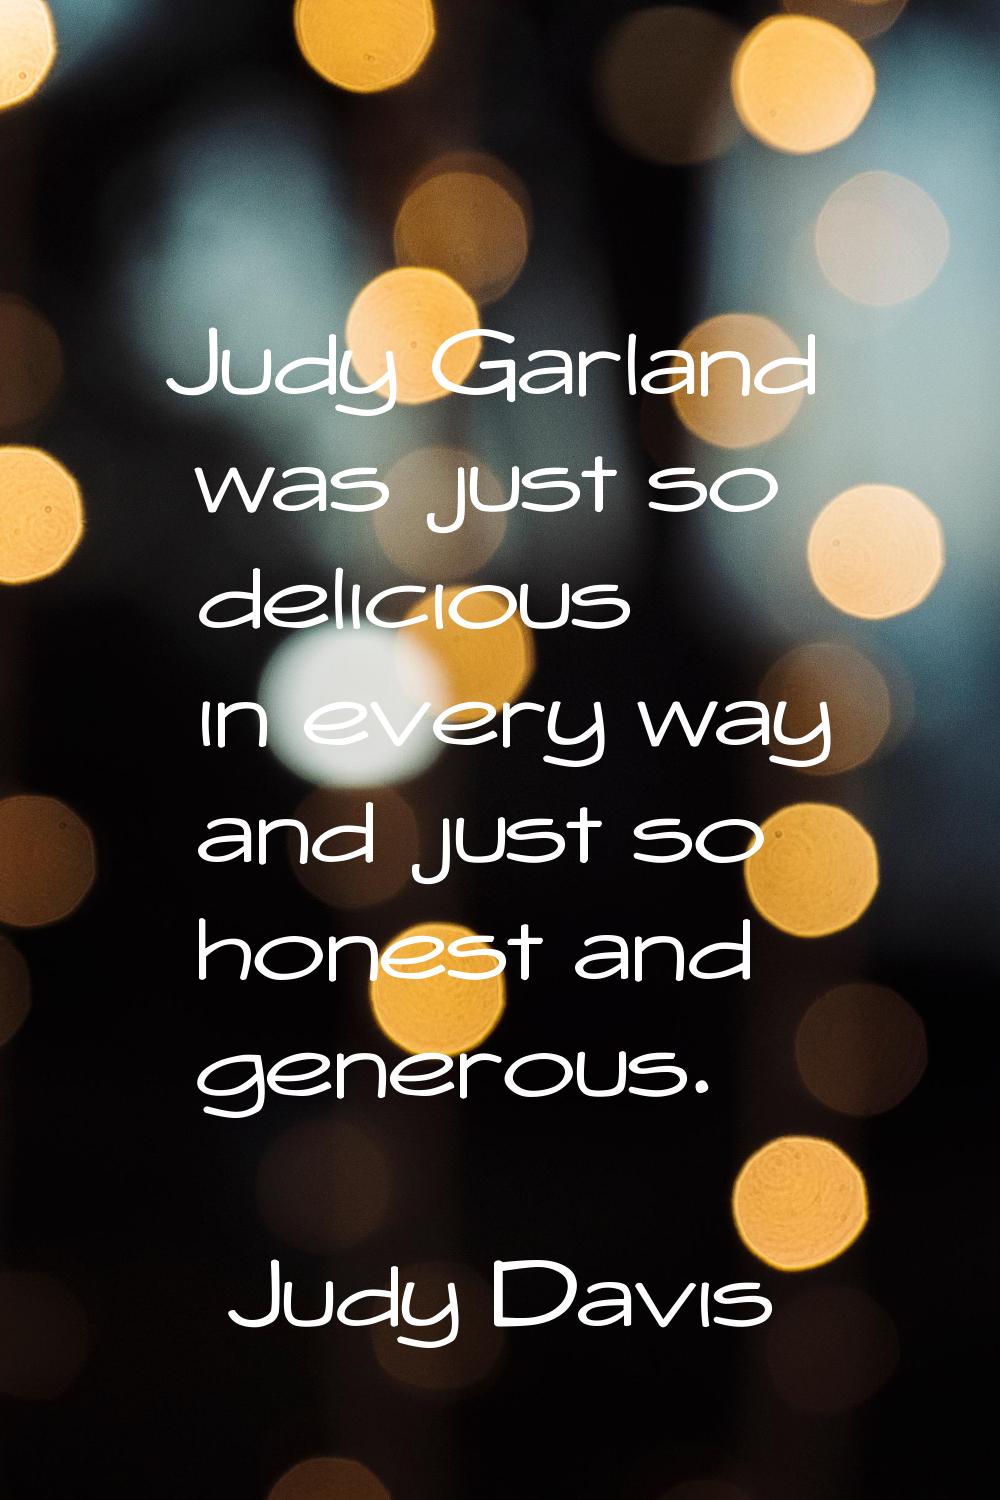 Judy Garland was just so delicious in every way and just so honest and generous.